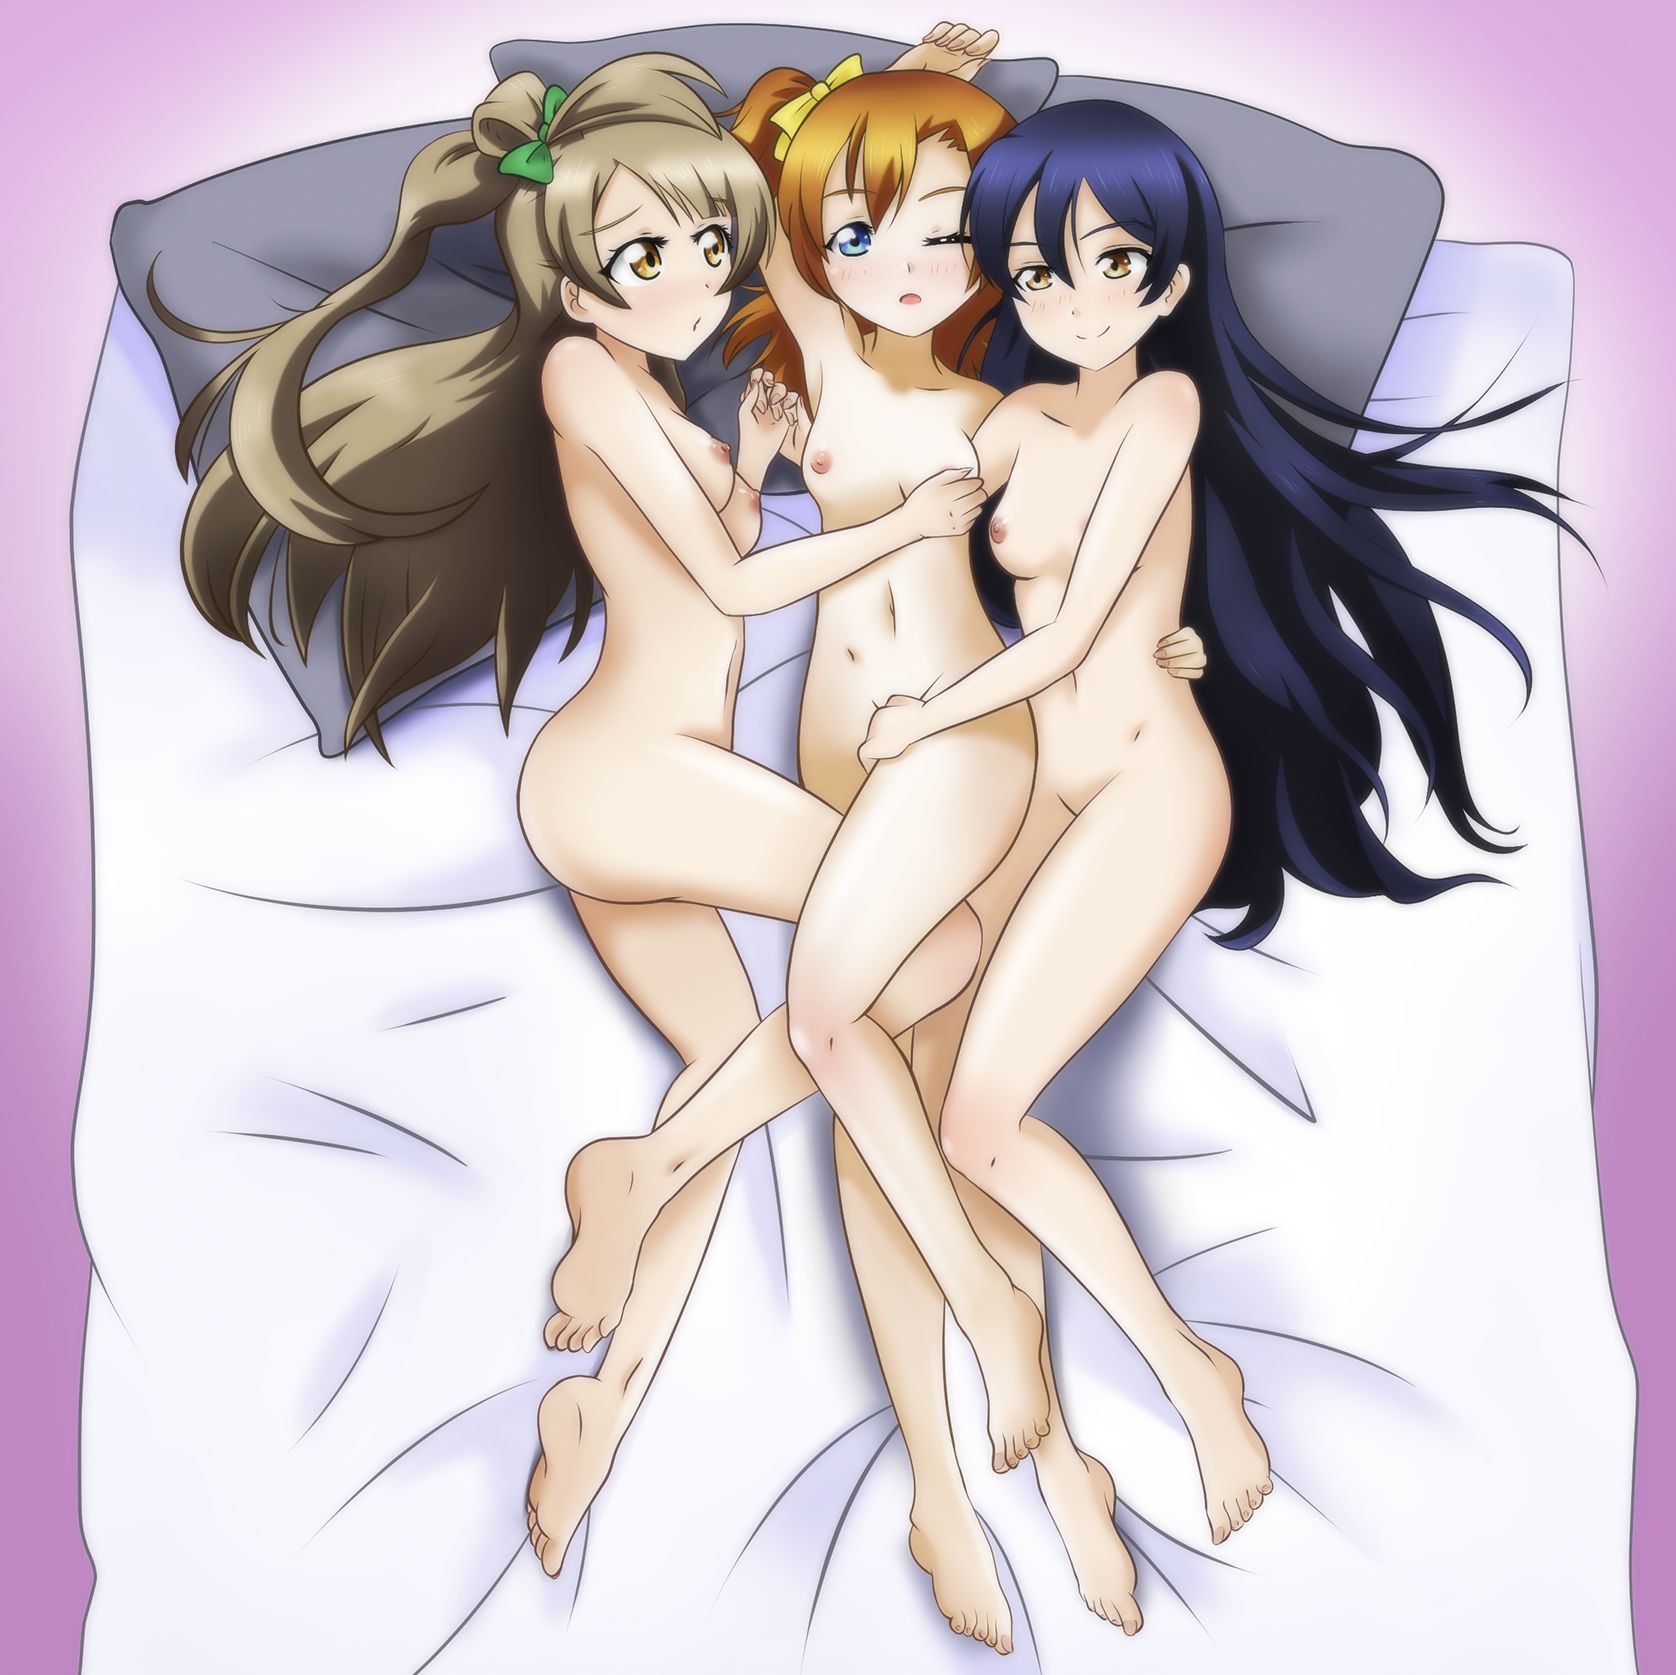 【Love Live】 Μ's (Muse) Member's Carefully Selected Erotic Images Total 191st Bullet 40